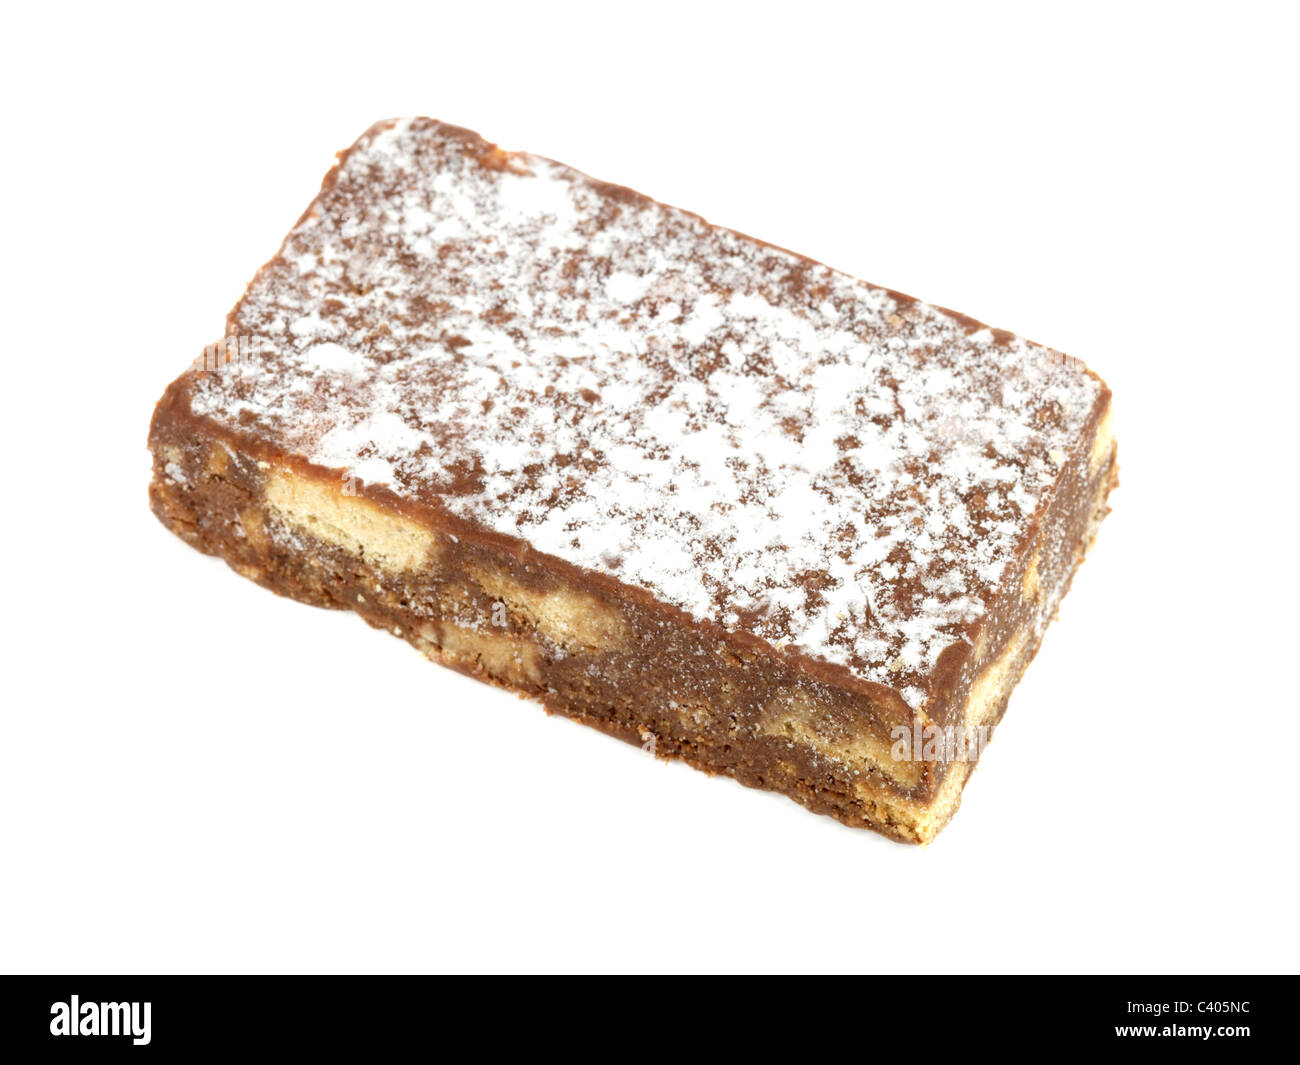 Freshly Made Tasty Chocolate Slice Snacks With No People Against A White Background With A Clipping Path Stock Photo